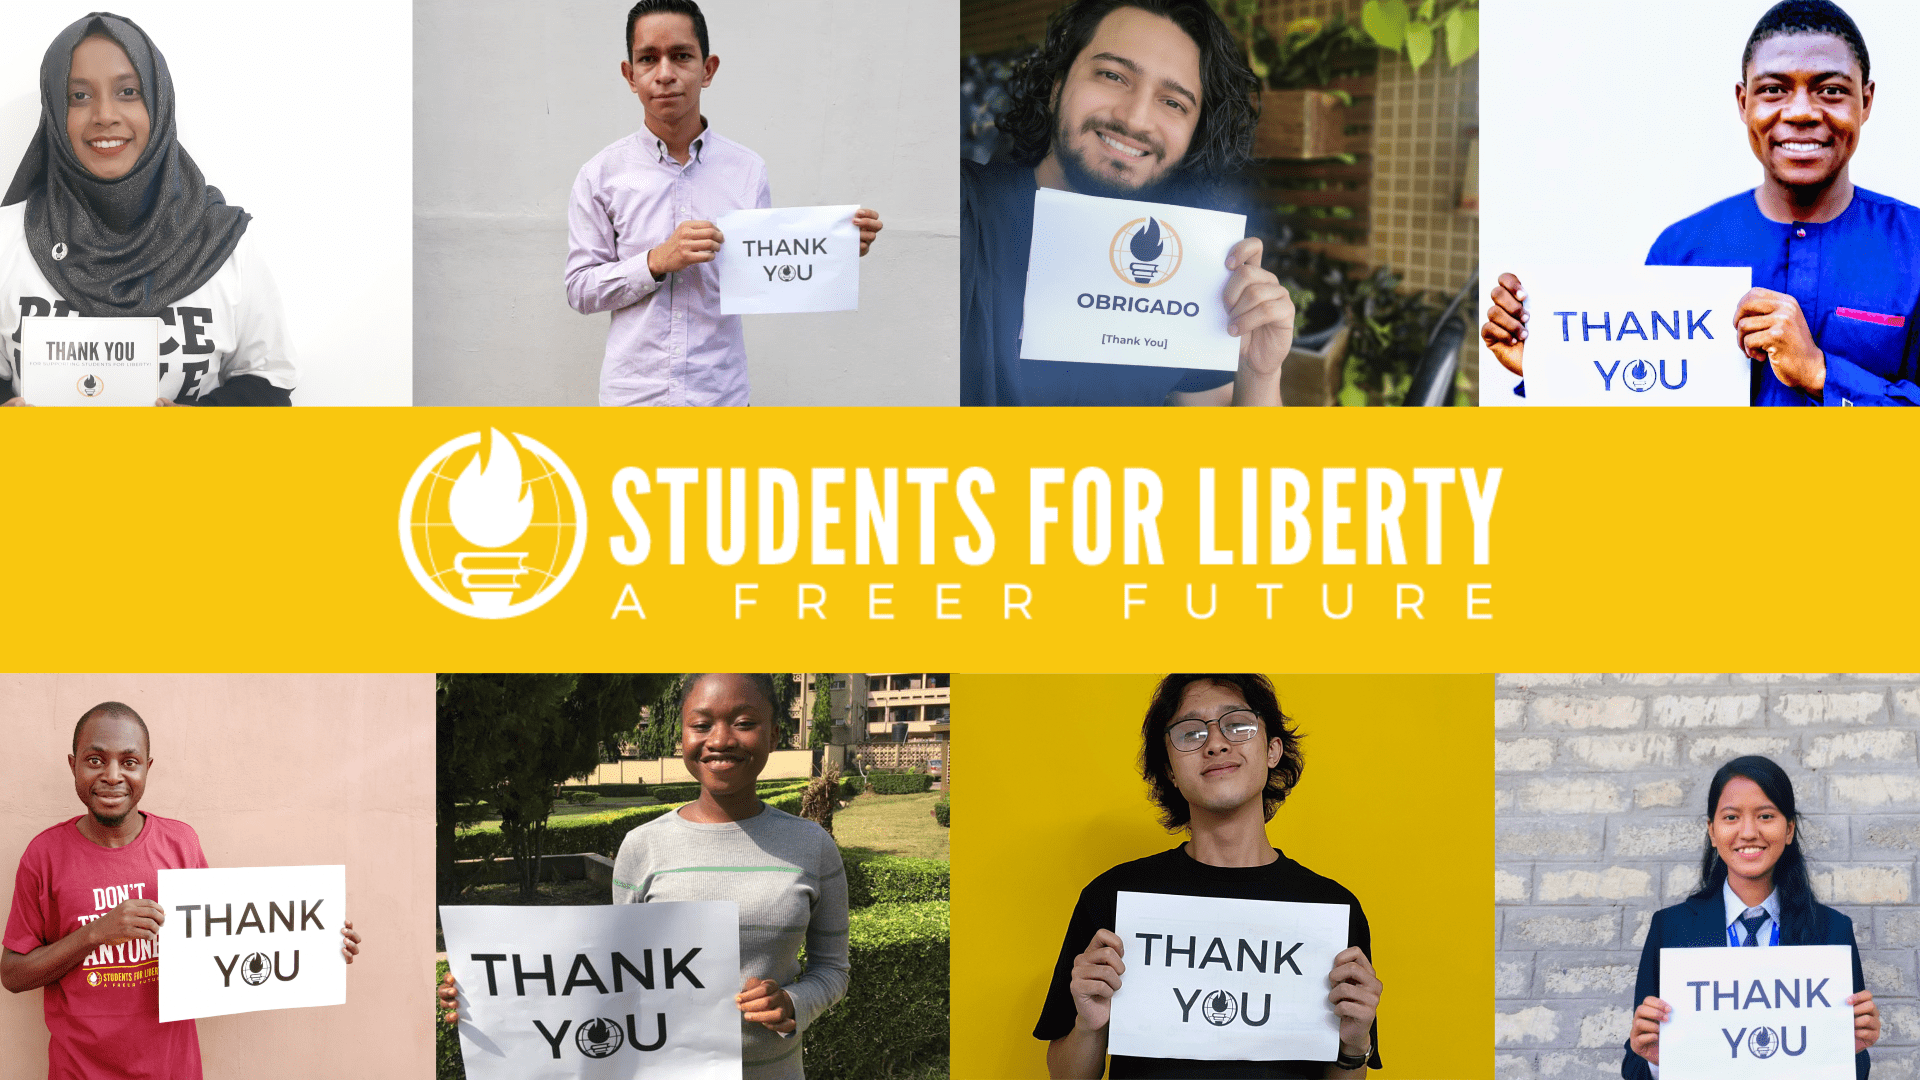 We asked our students why they’re thankful to our donors for the opportunities you make possible and we were overwhelmed by their replies.